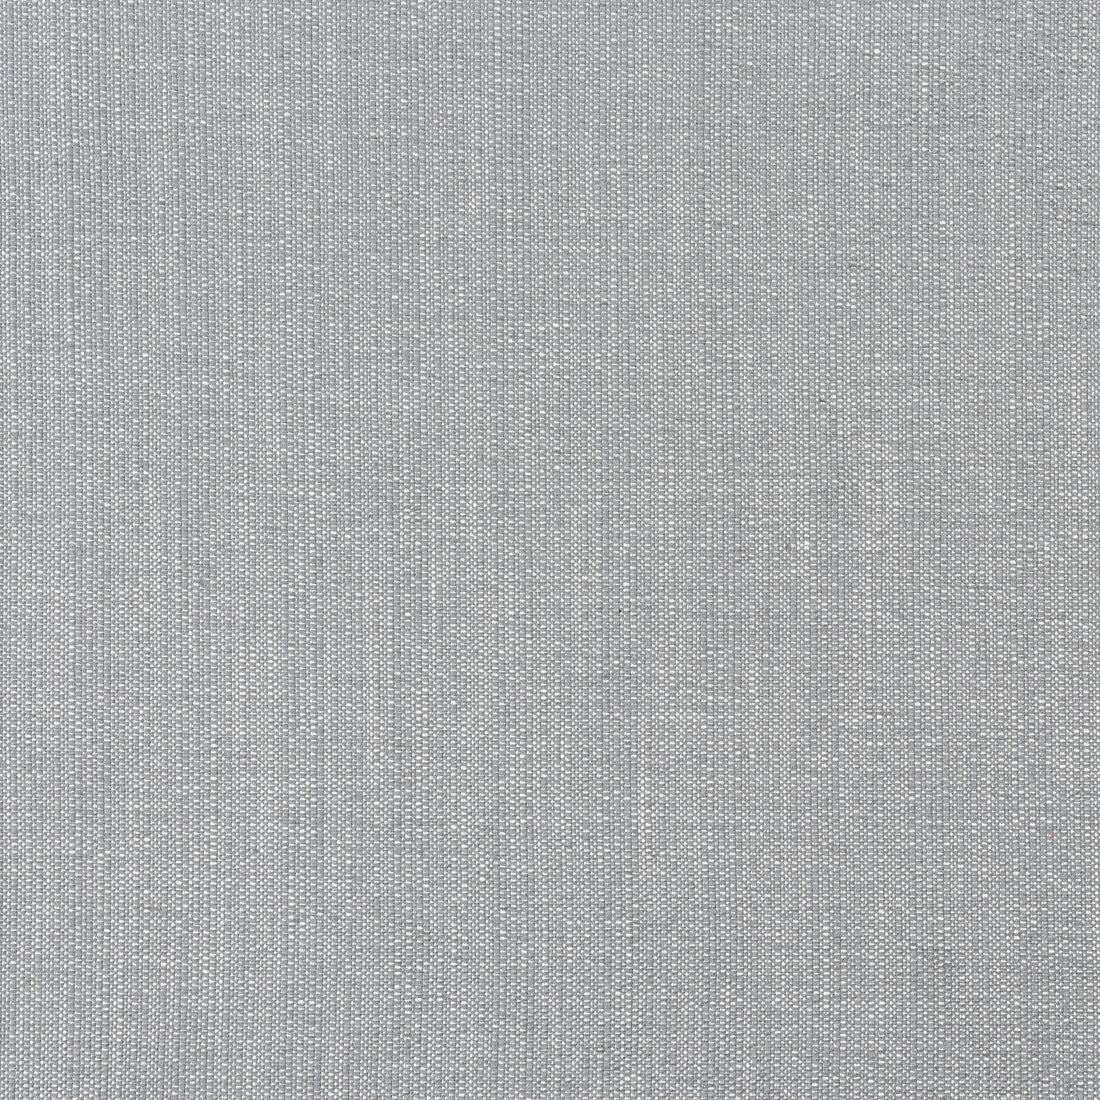 Veda fabric in smoke color - pattern number W8721 - by Thibaut in the Haven Textures collection